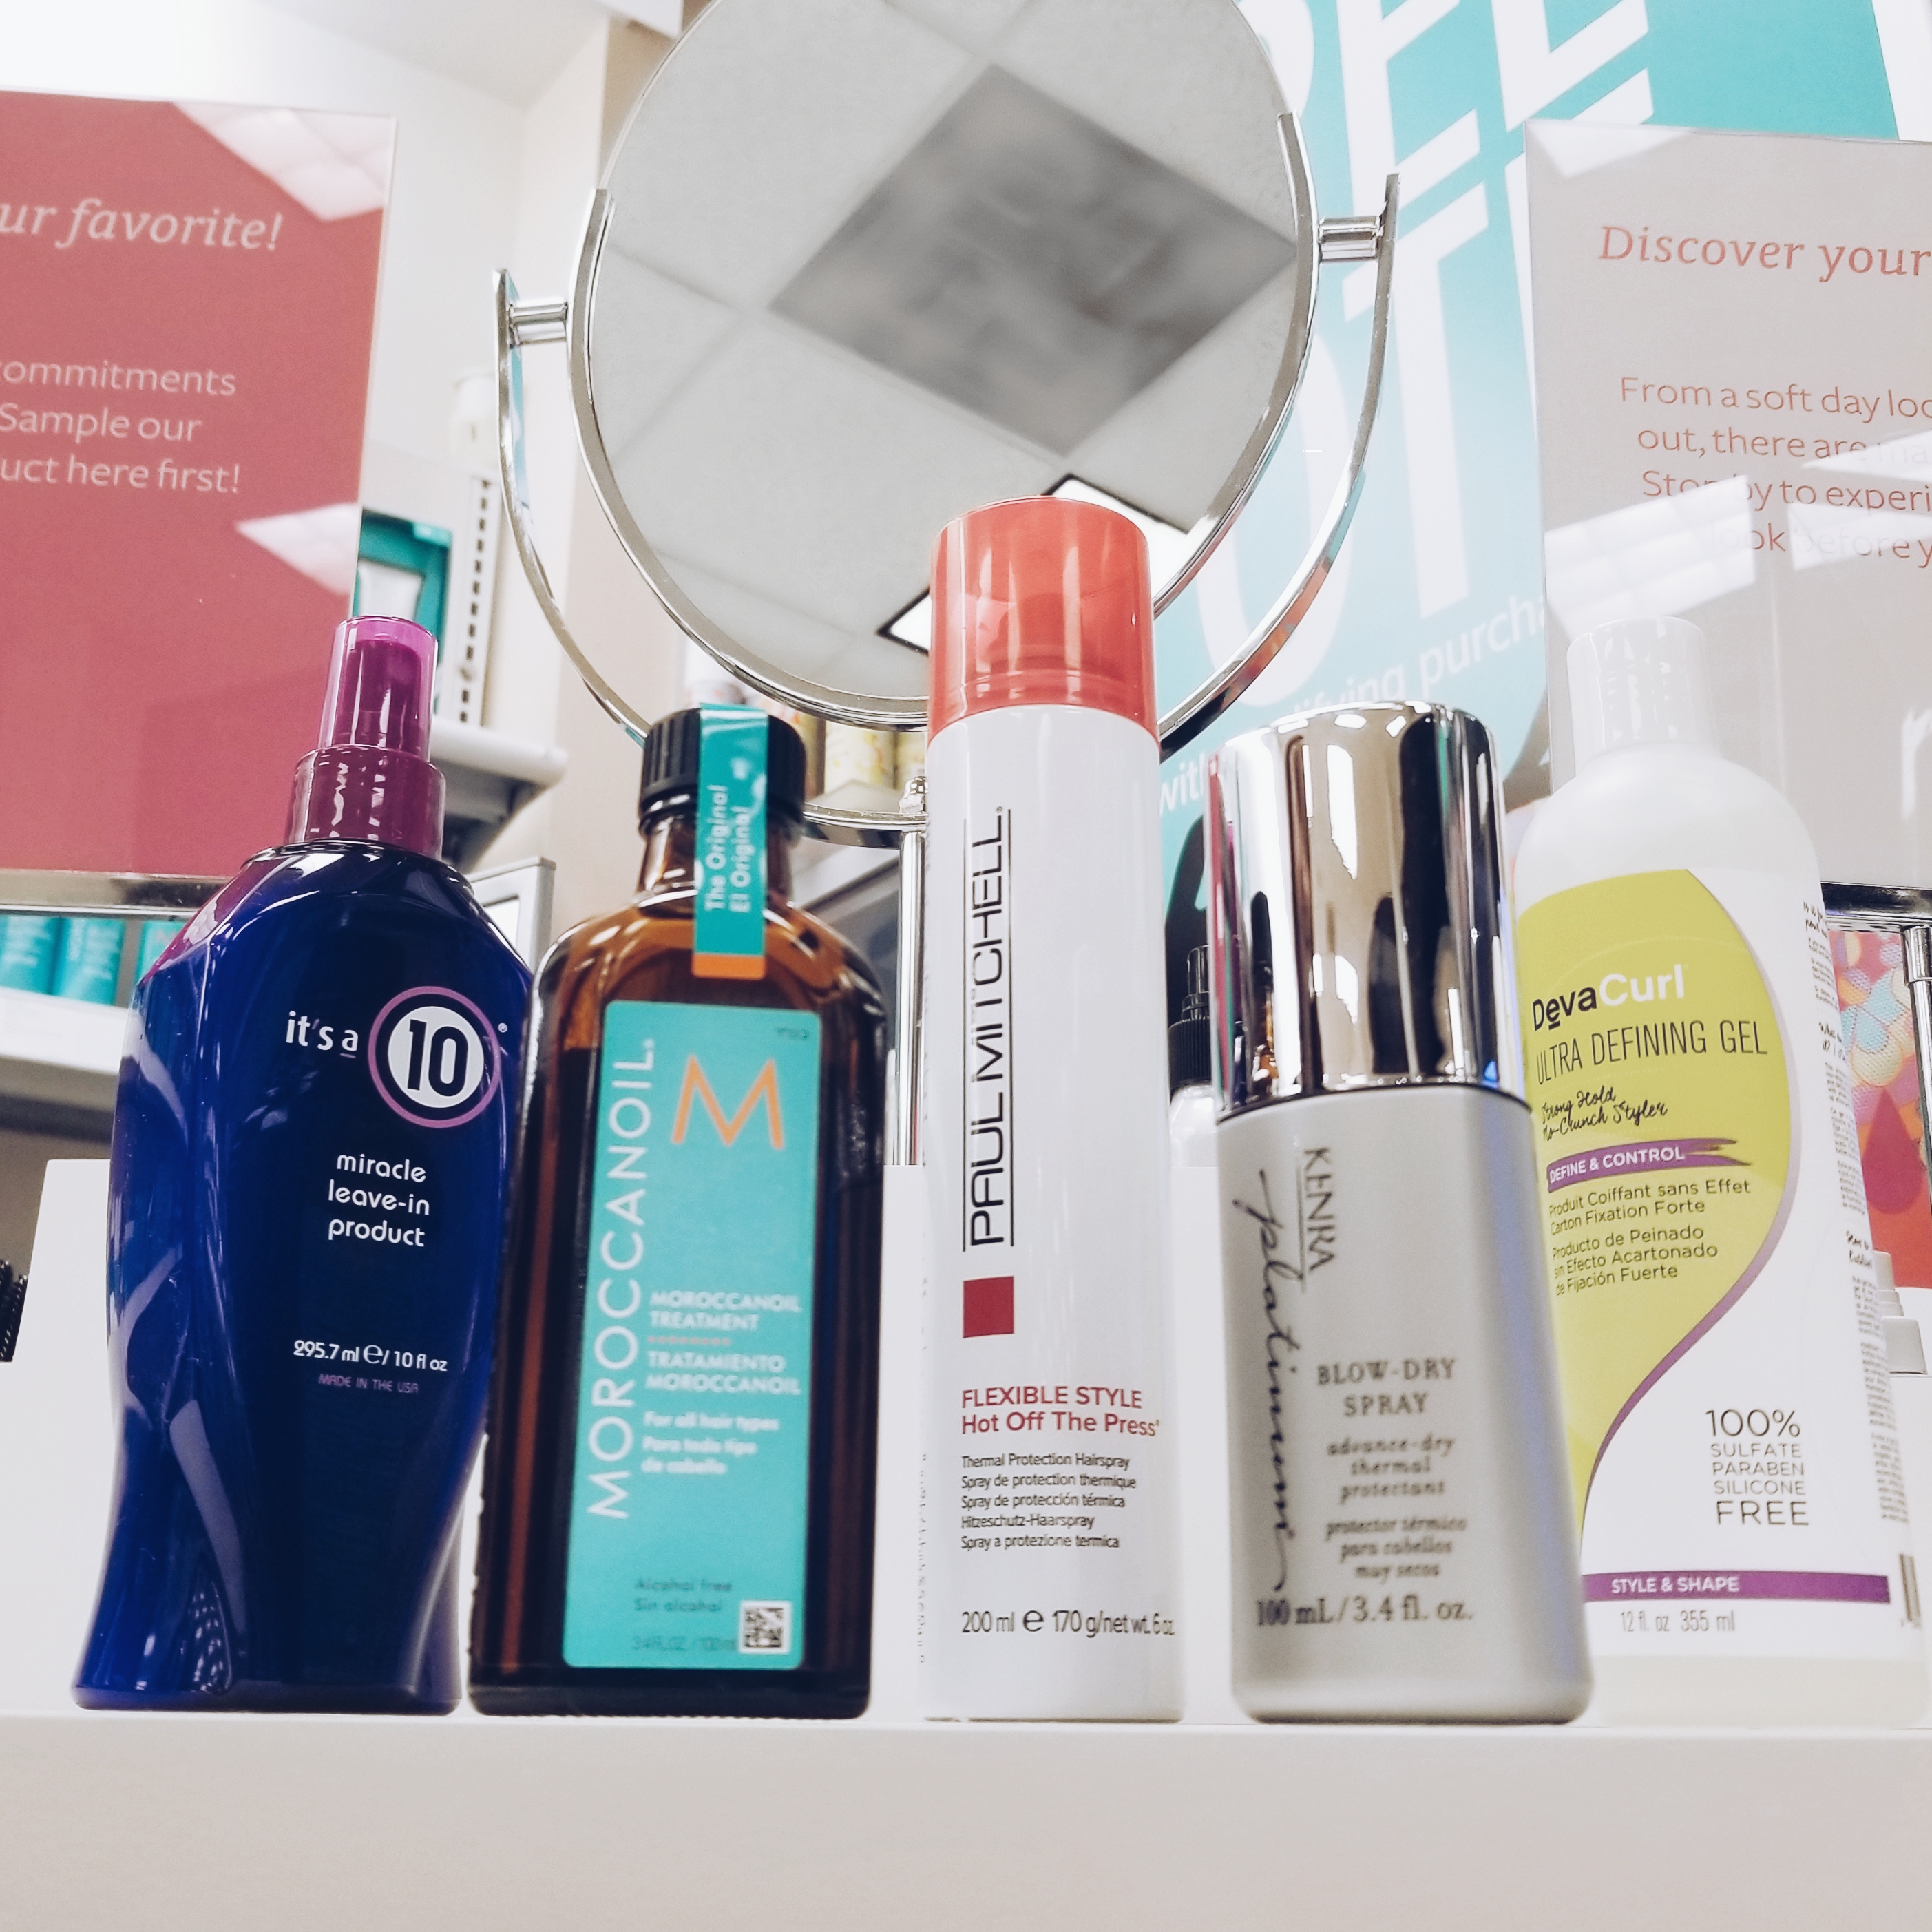 Extra LSR: Weather-proofing Your Hair with Beauty Brands.